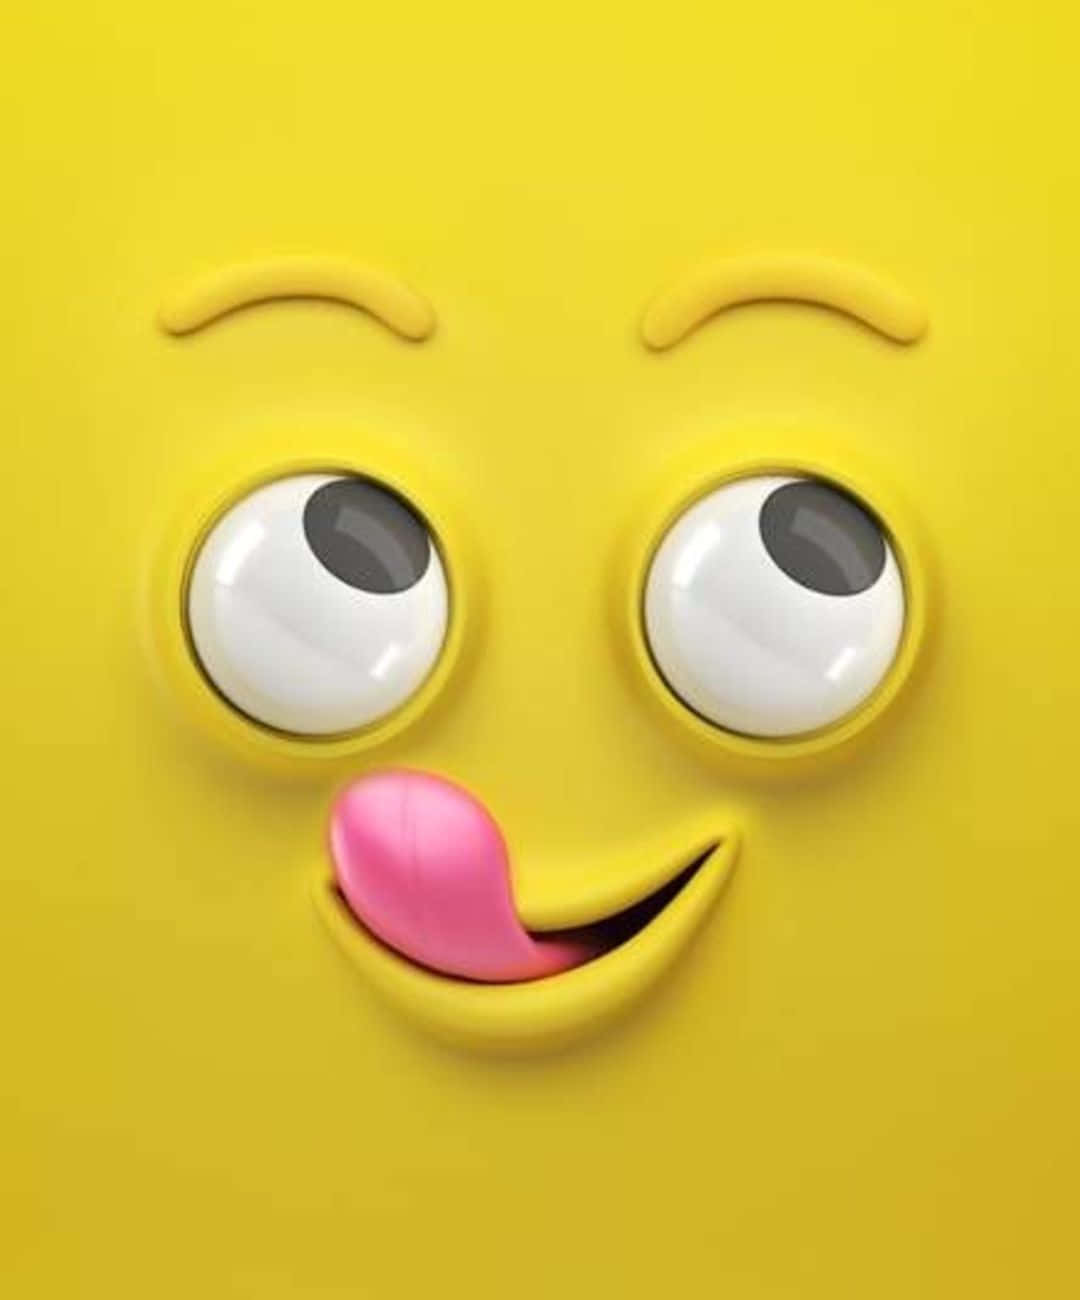 Download Funny 3D Emoji Discord Profile Picture | Wallpapers.com